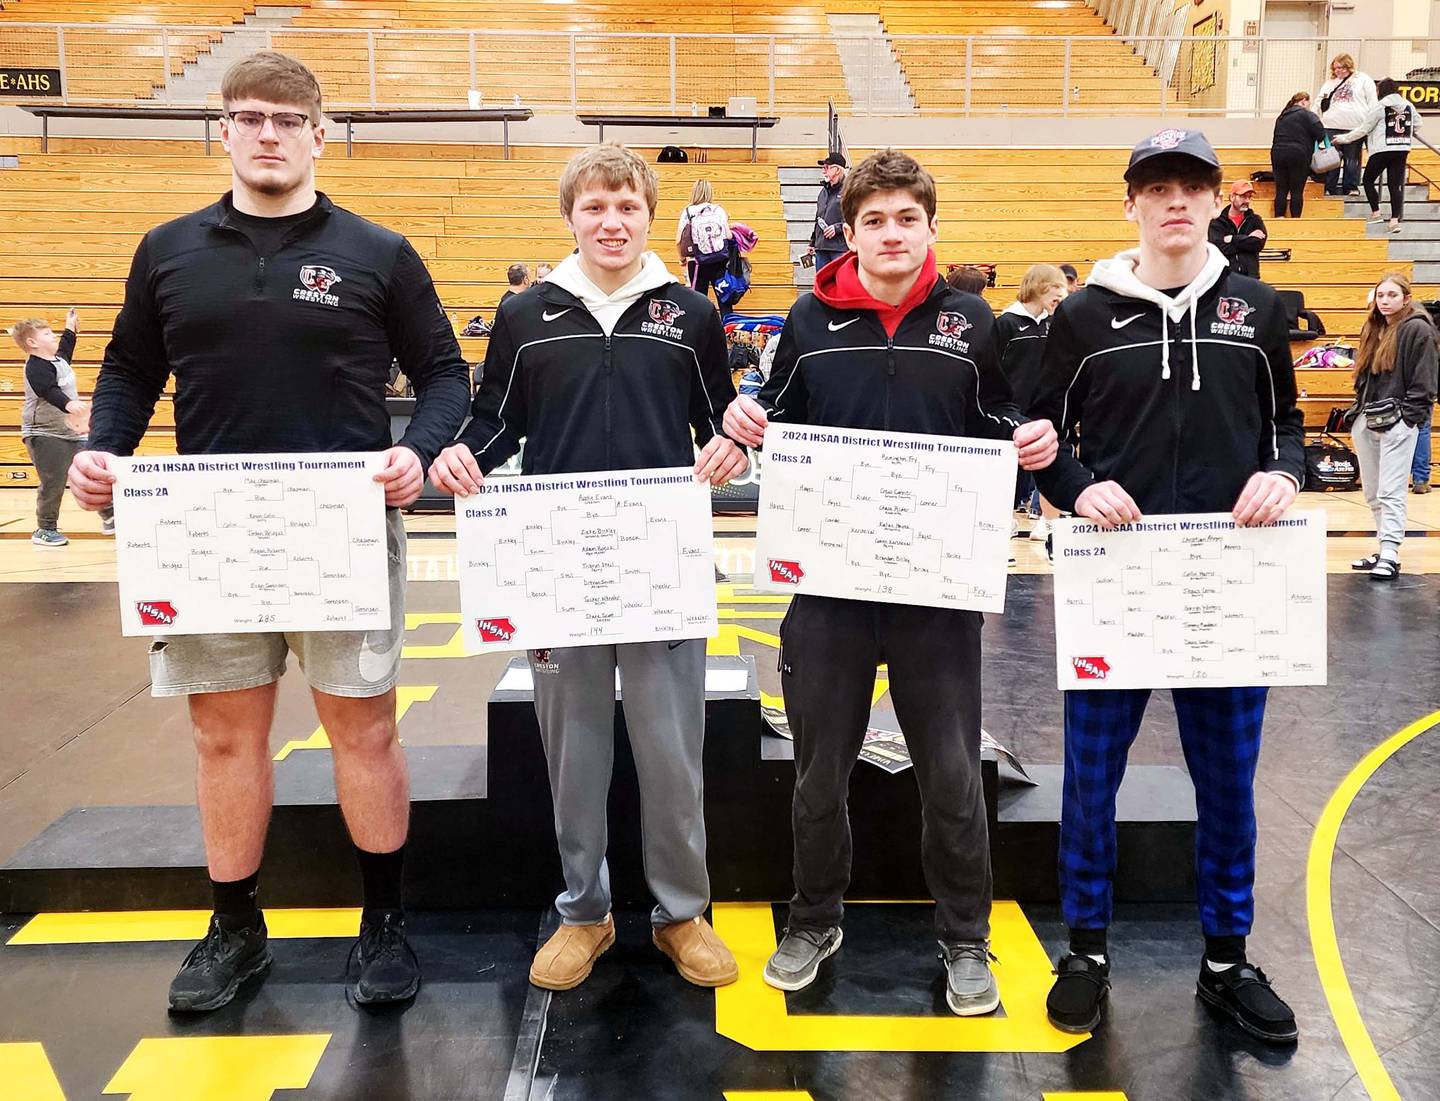 Four Panther wrestlers took first in their weight class at Districts Saturday in Atlantic to advance to state. From left, Max Chapman (285), Austin Evans (144), Brandon Briley (138) and Christian Ahrens (120).